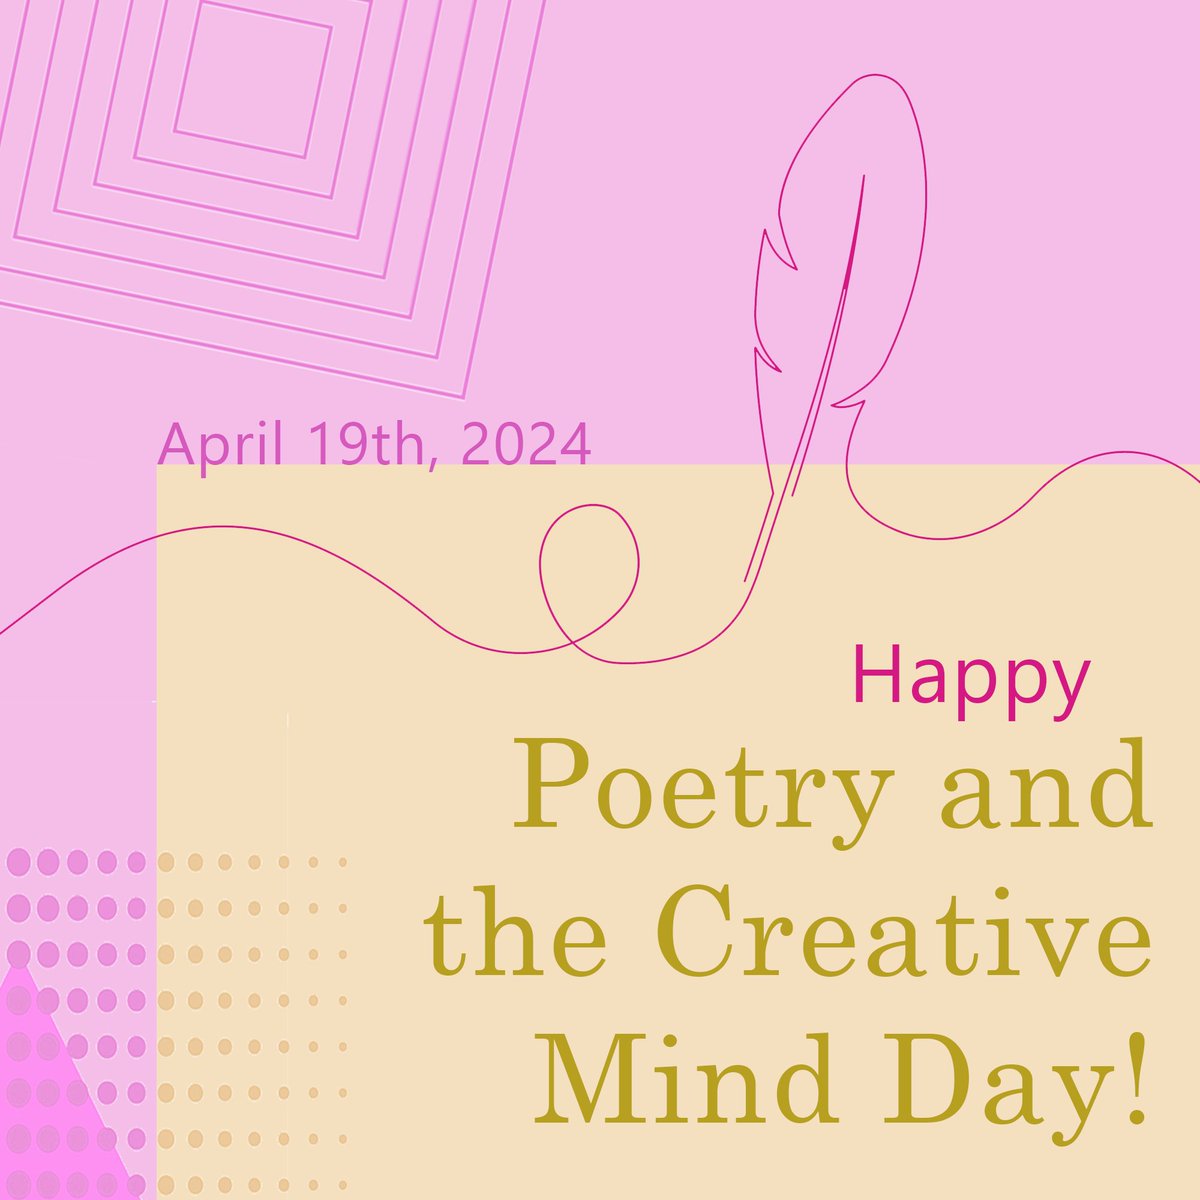 Today, April 19th, 2024, is a small holiday, Poetry and the Creative Mind Day! We're taking today to appreciate all of the wonderful poetry we have been able to publish here at the press over the years.